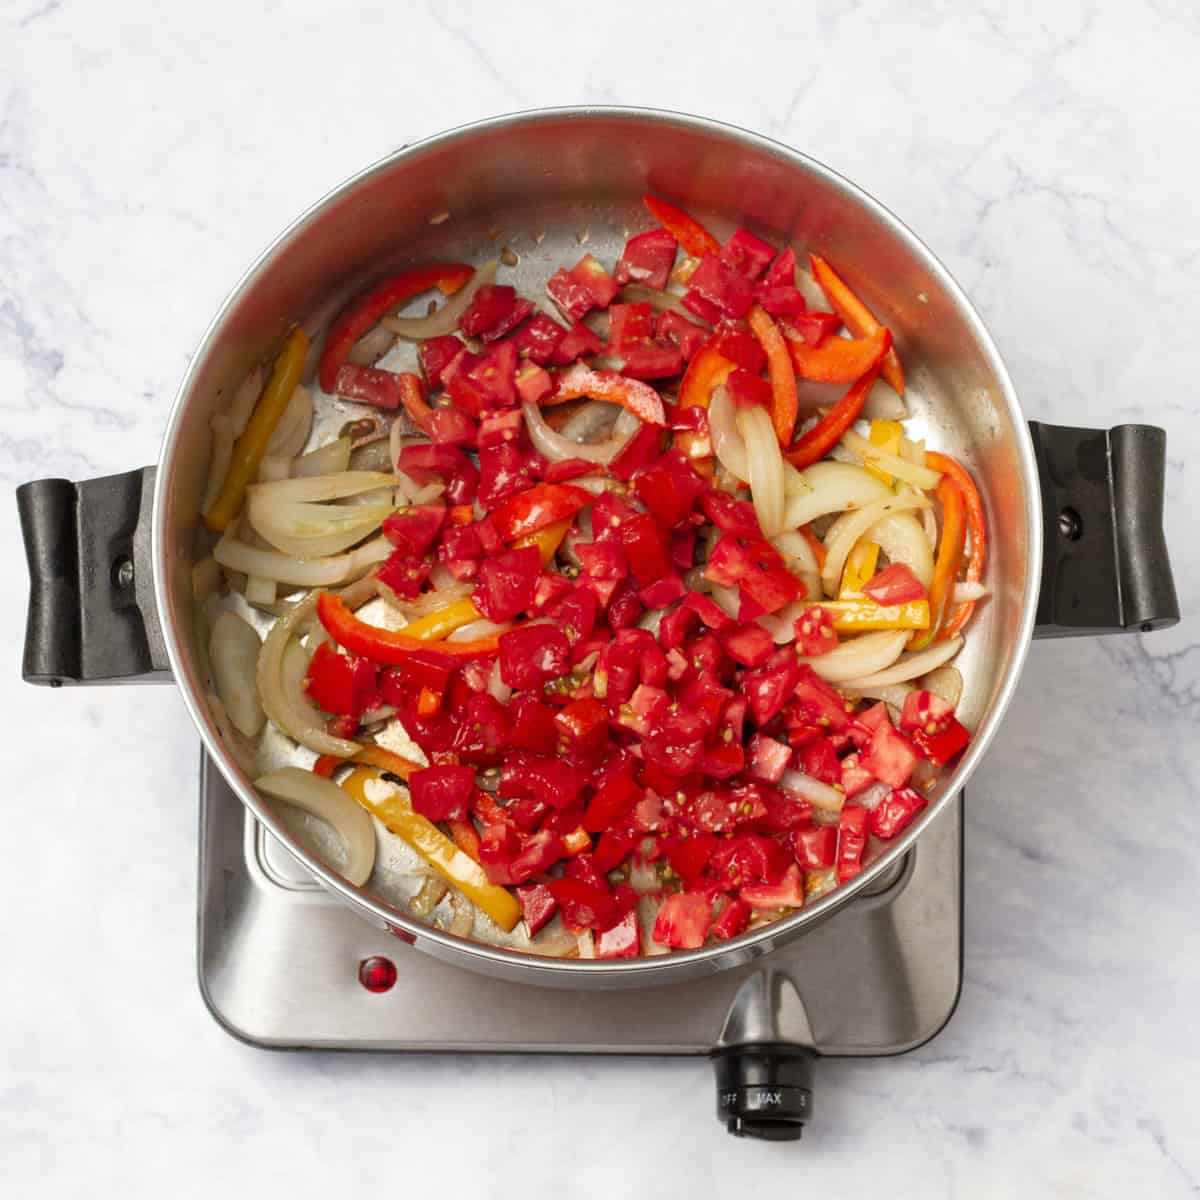 Sliced onions, red and yellow bell peppers, and diced tomatoes in a saucepan